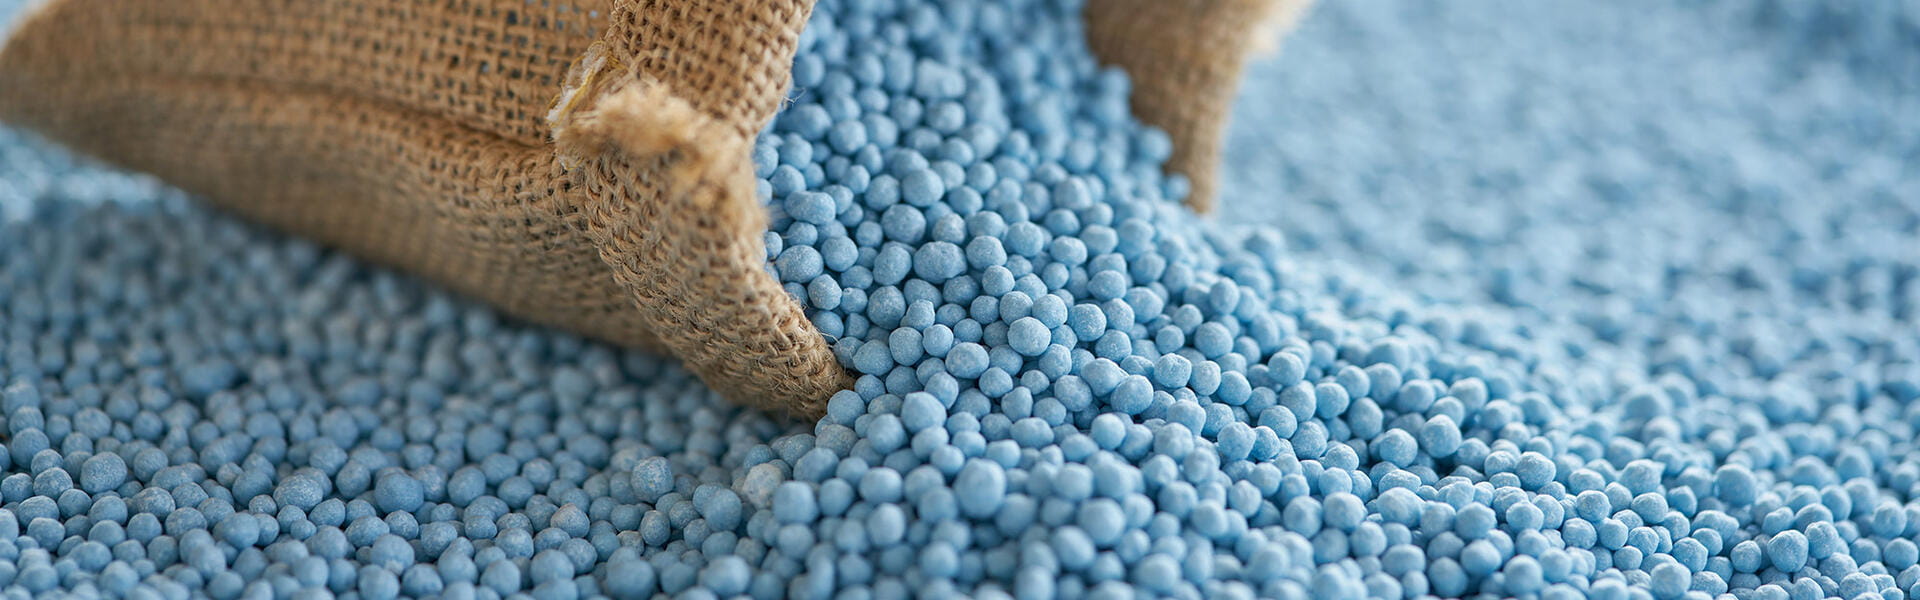 Powder applications for agrochemical